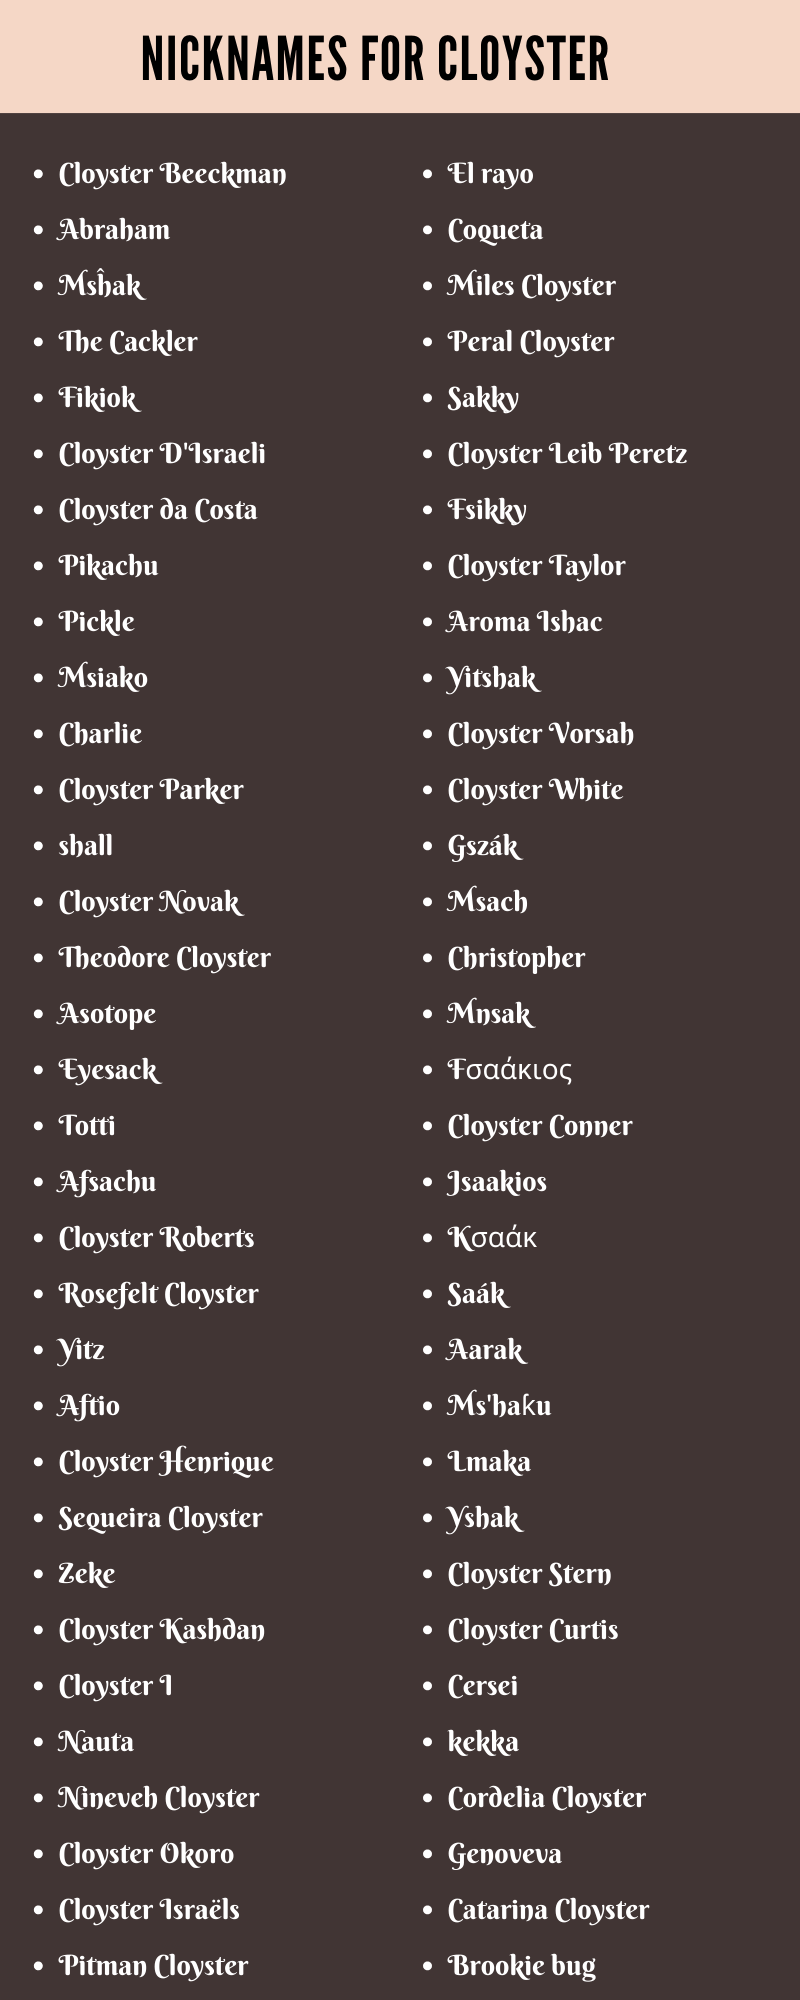 Nicknames For Cloyster